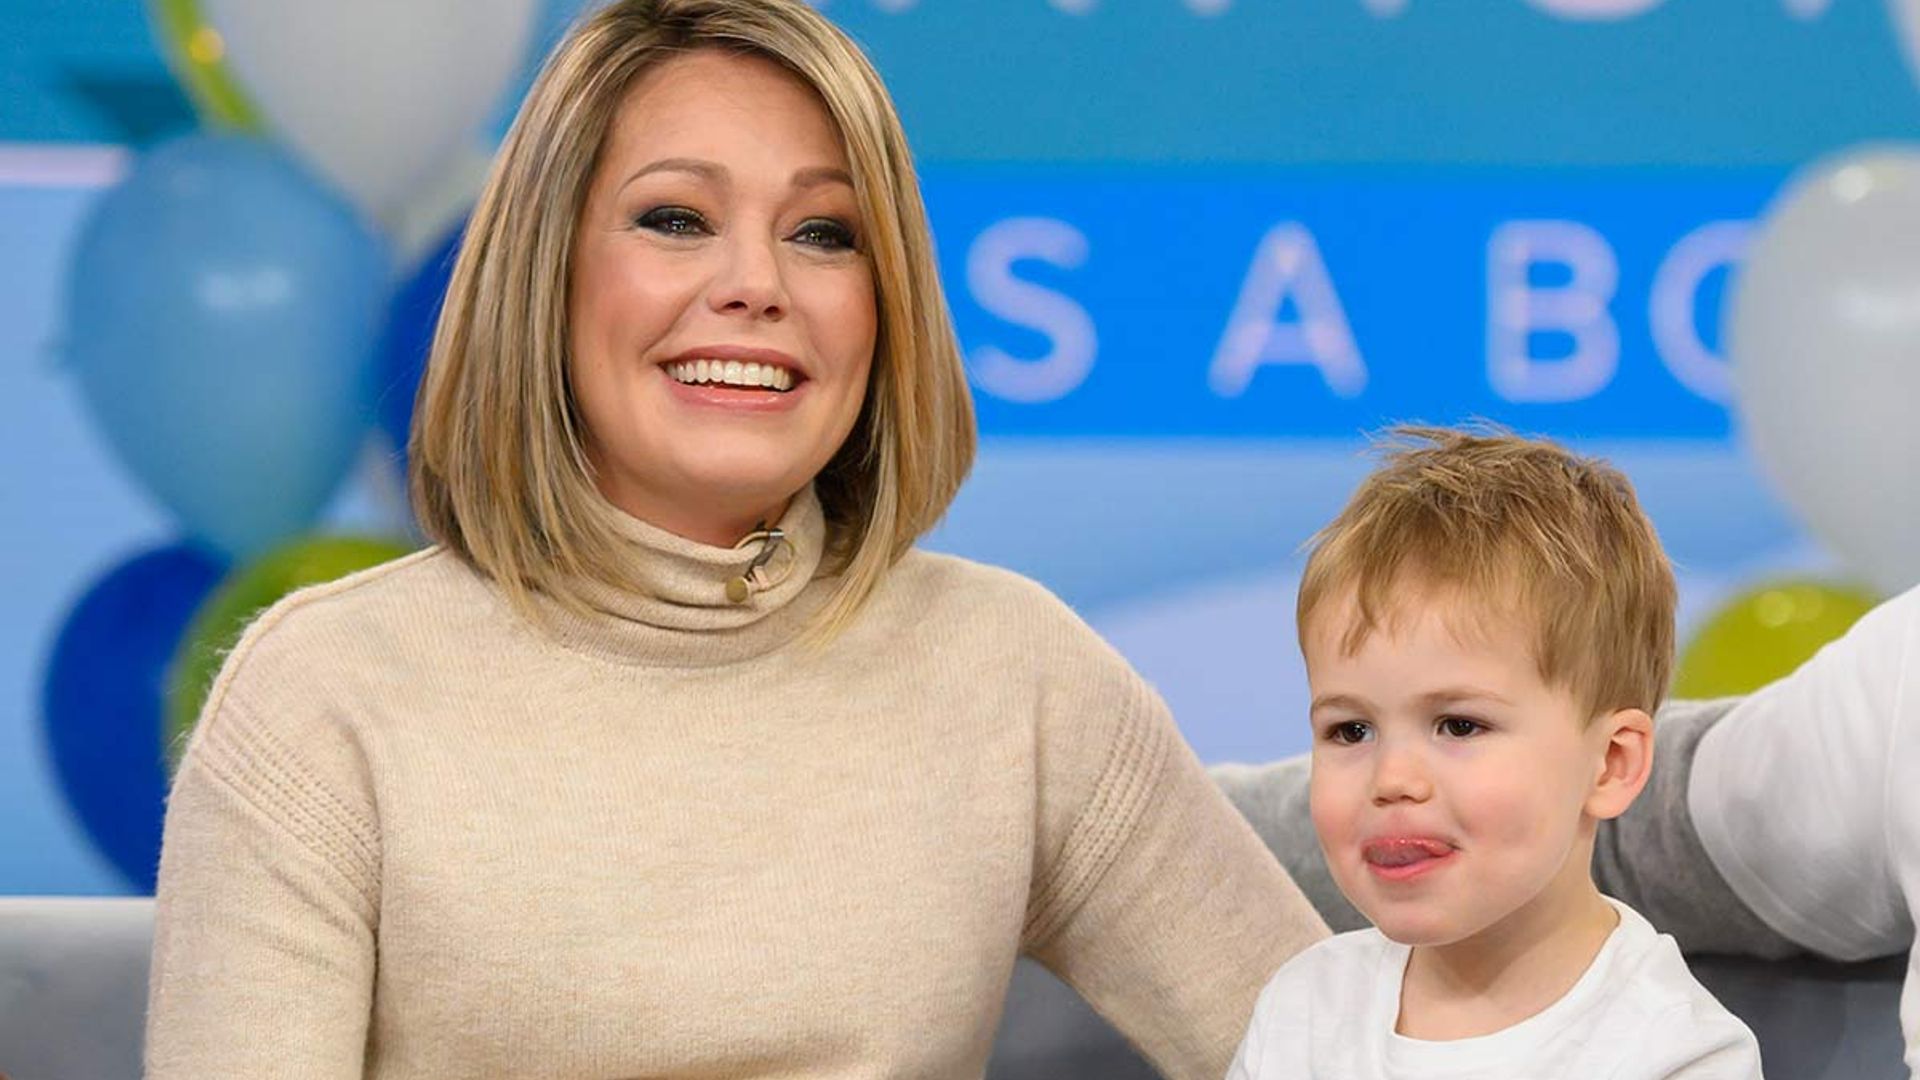 Today's Dylan Dreyer causes a stir with adorable video of son Calvin